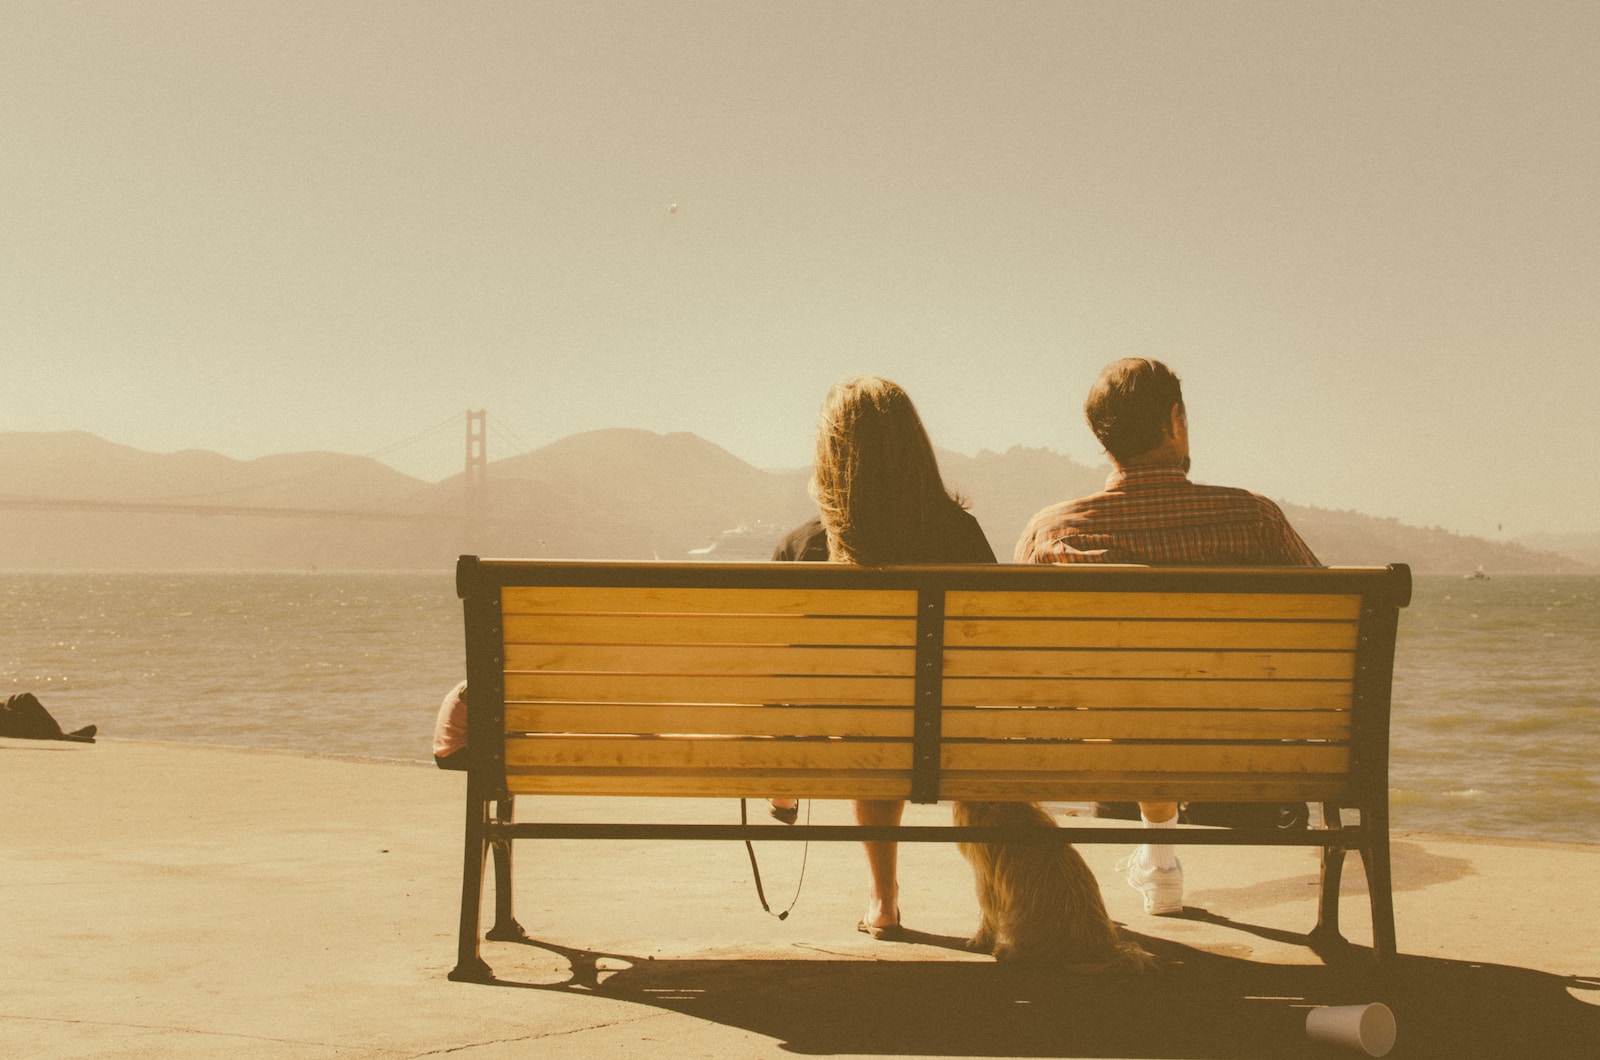 How to Break up With Someone: 7 Proper Ways of Bidding Goodbye